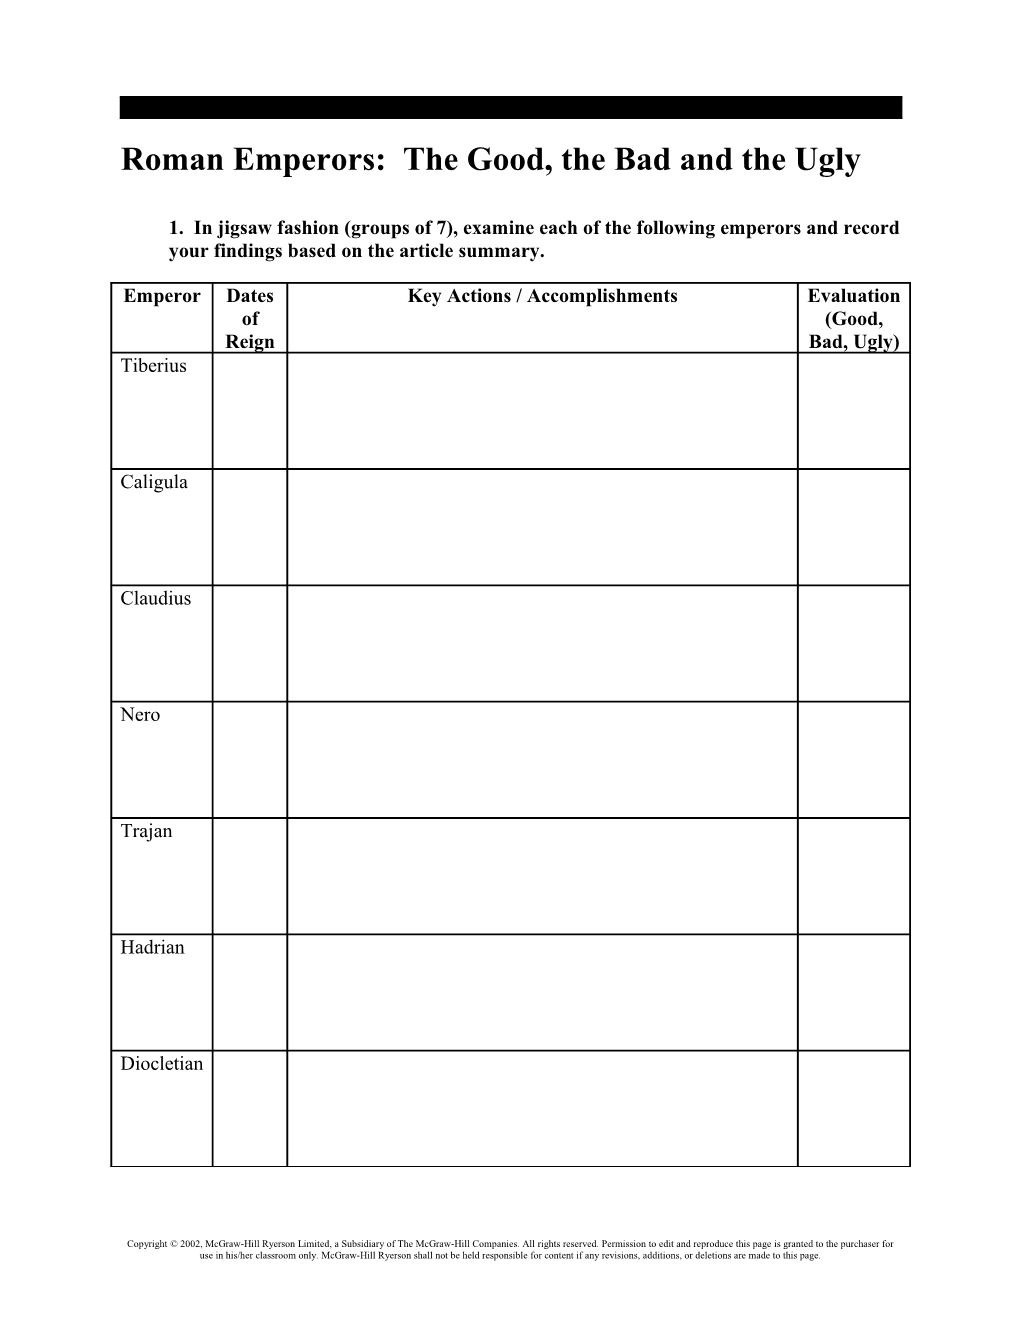 Roman Emperors: the Good, the Bad and the Ugly1. in Jigsaw Fashion (Groups of 7), Examine